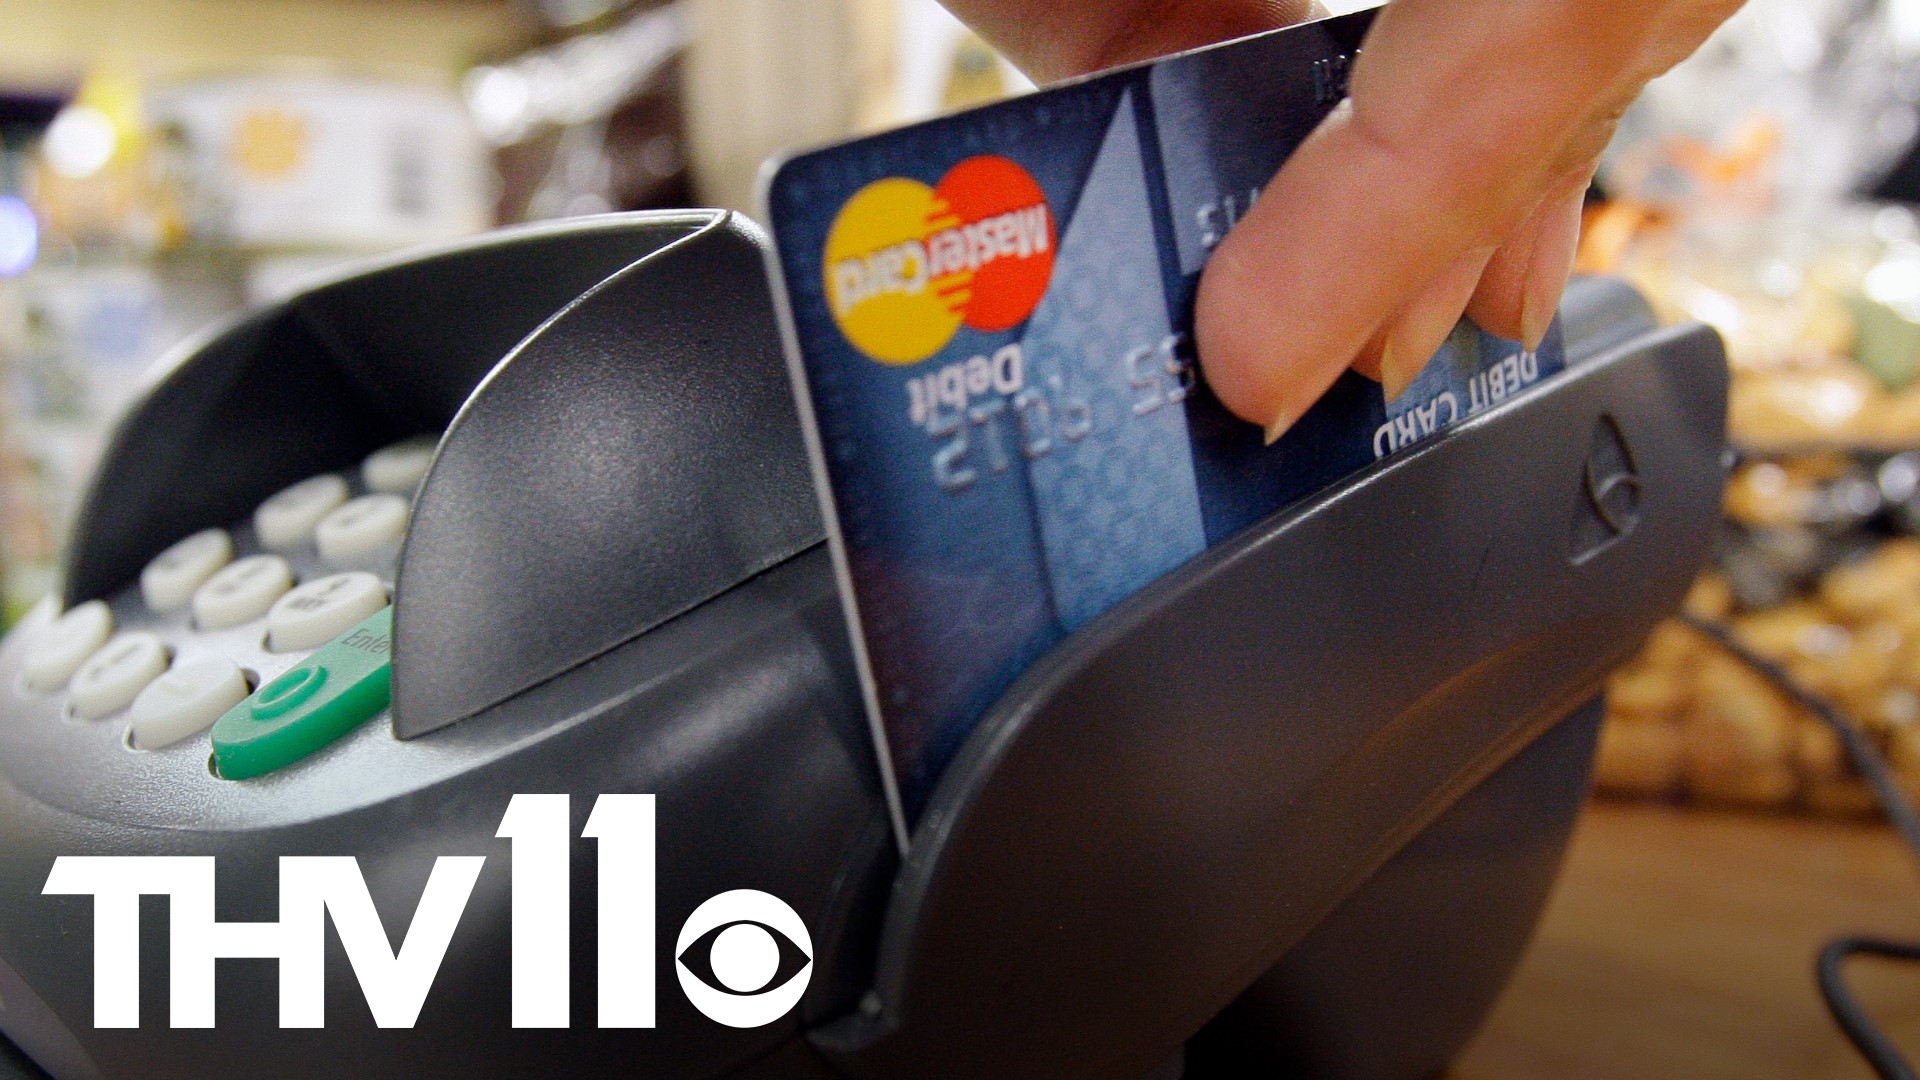 Americans have been charging more to their credit cards since the pandemic— now you might be wondering how that impacts our economy and how you can get out of debt.